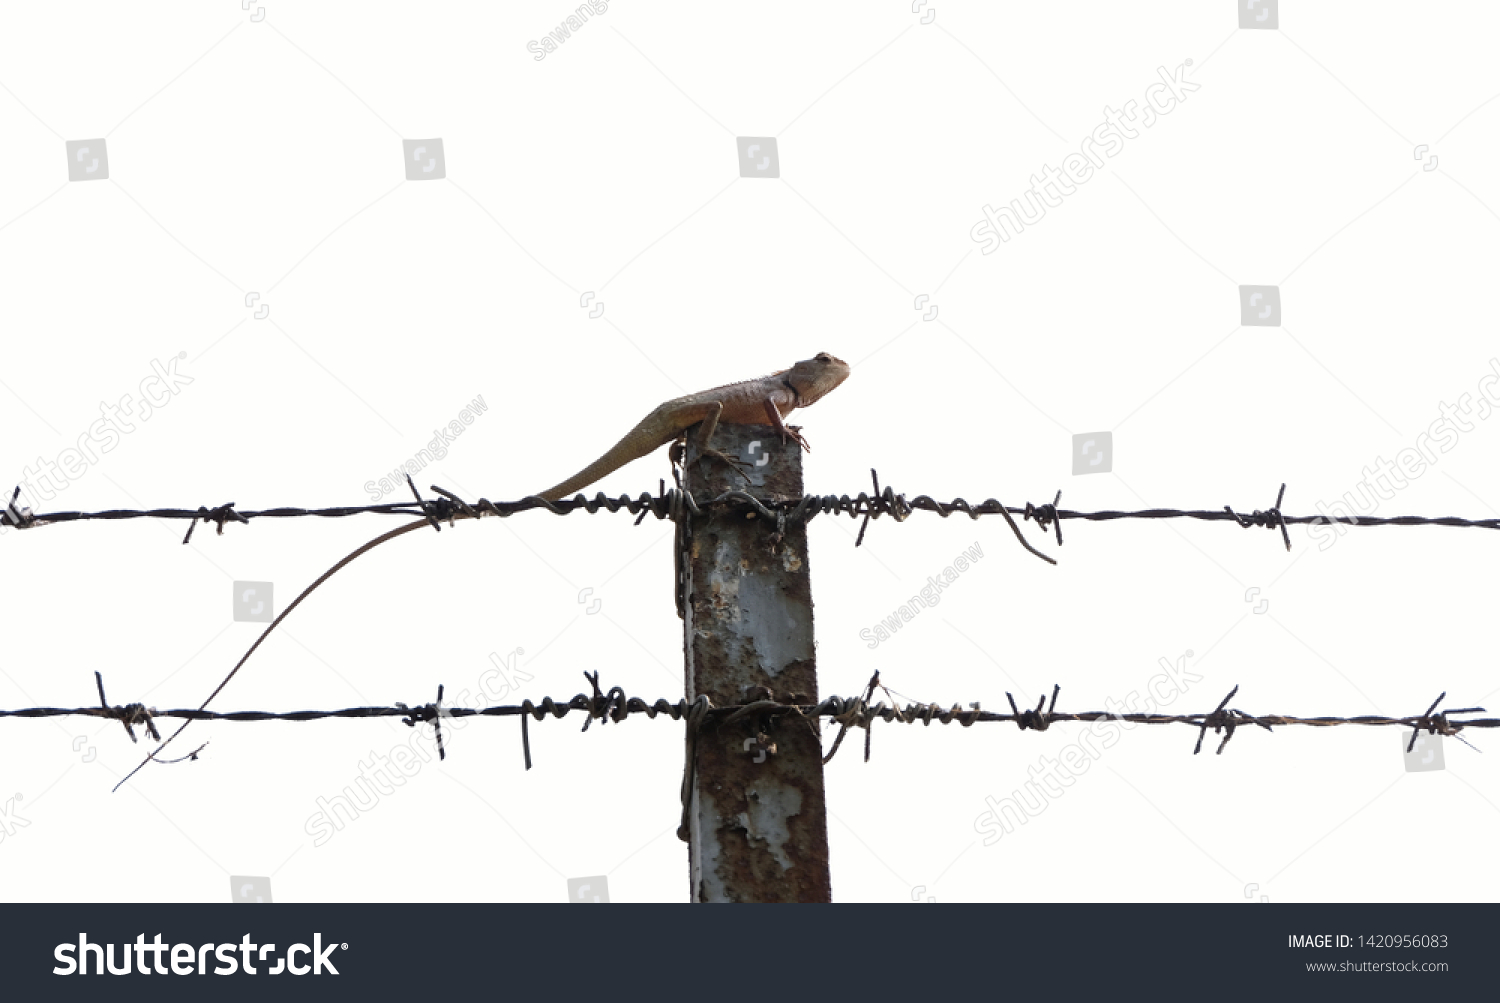 Asia lizard on concrete pole and barbed wire fence on white background,Business and finance concept success from intention and determination. #1420956083